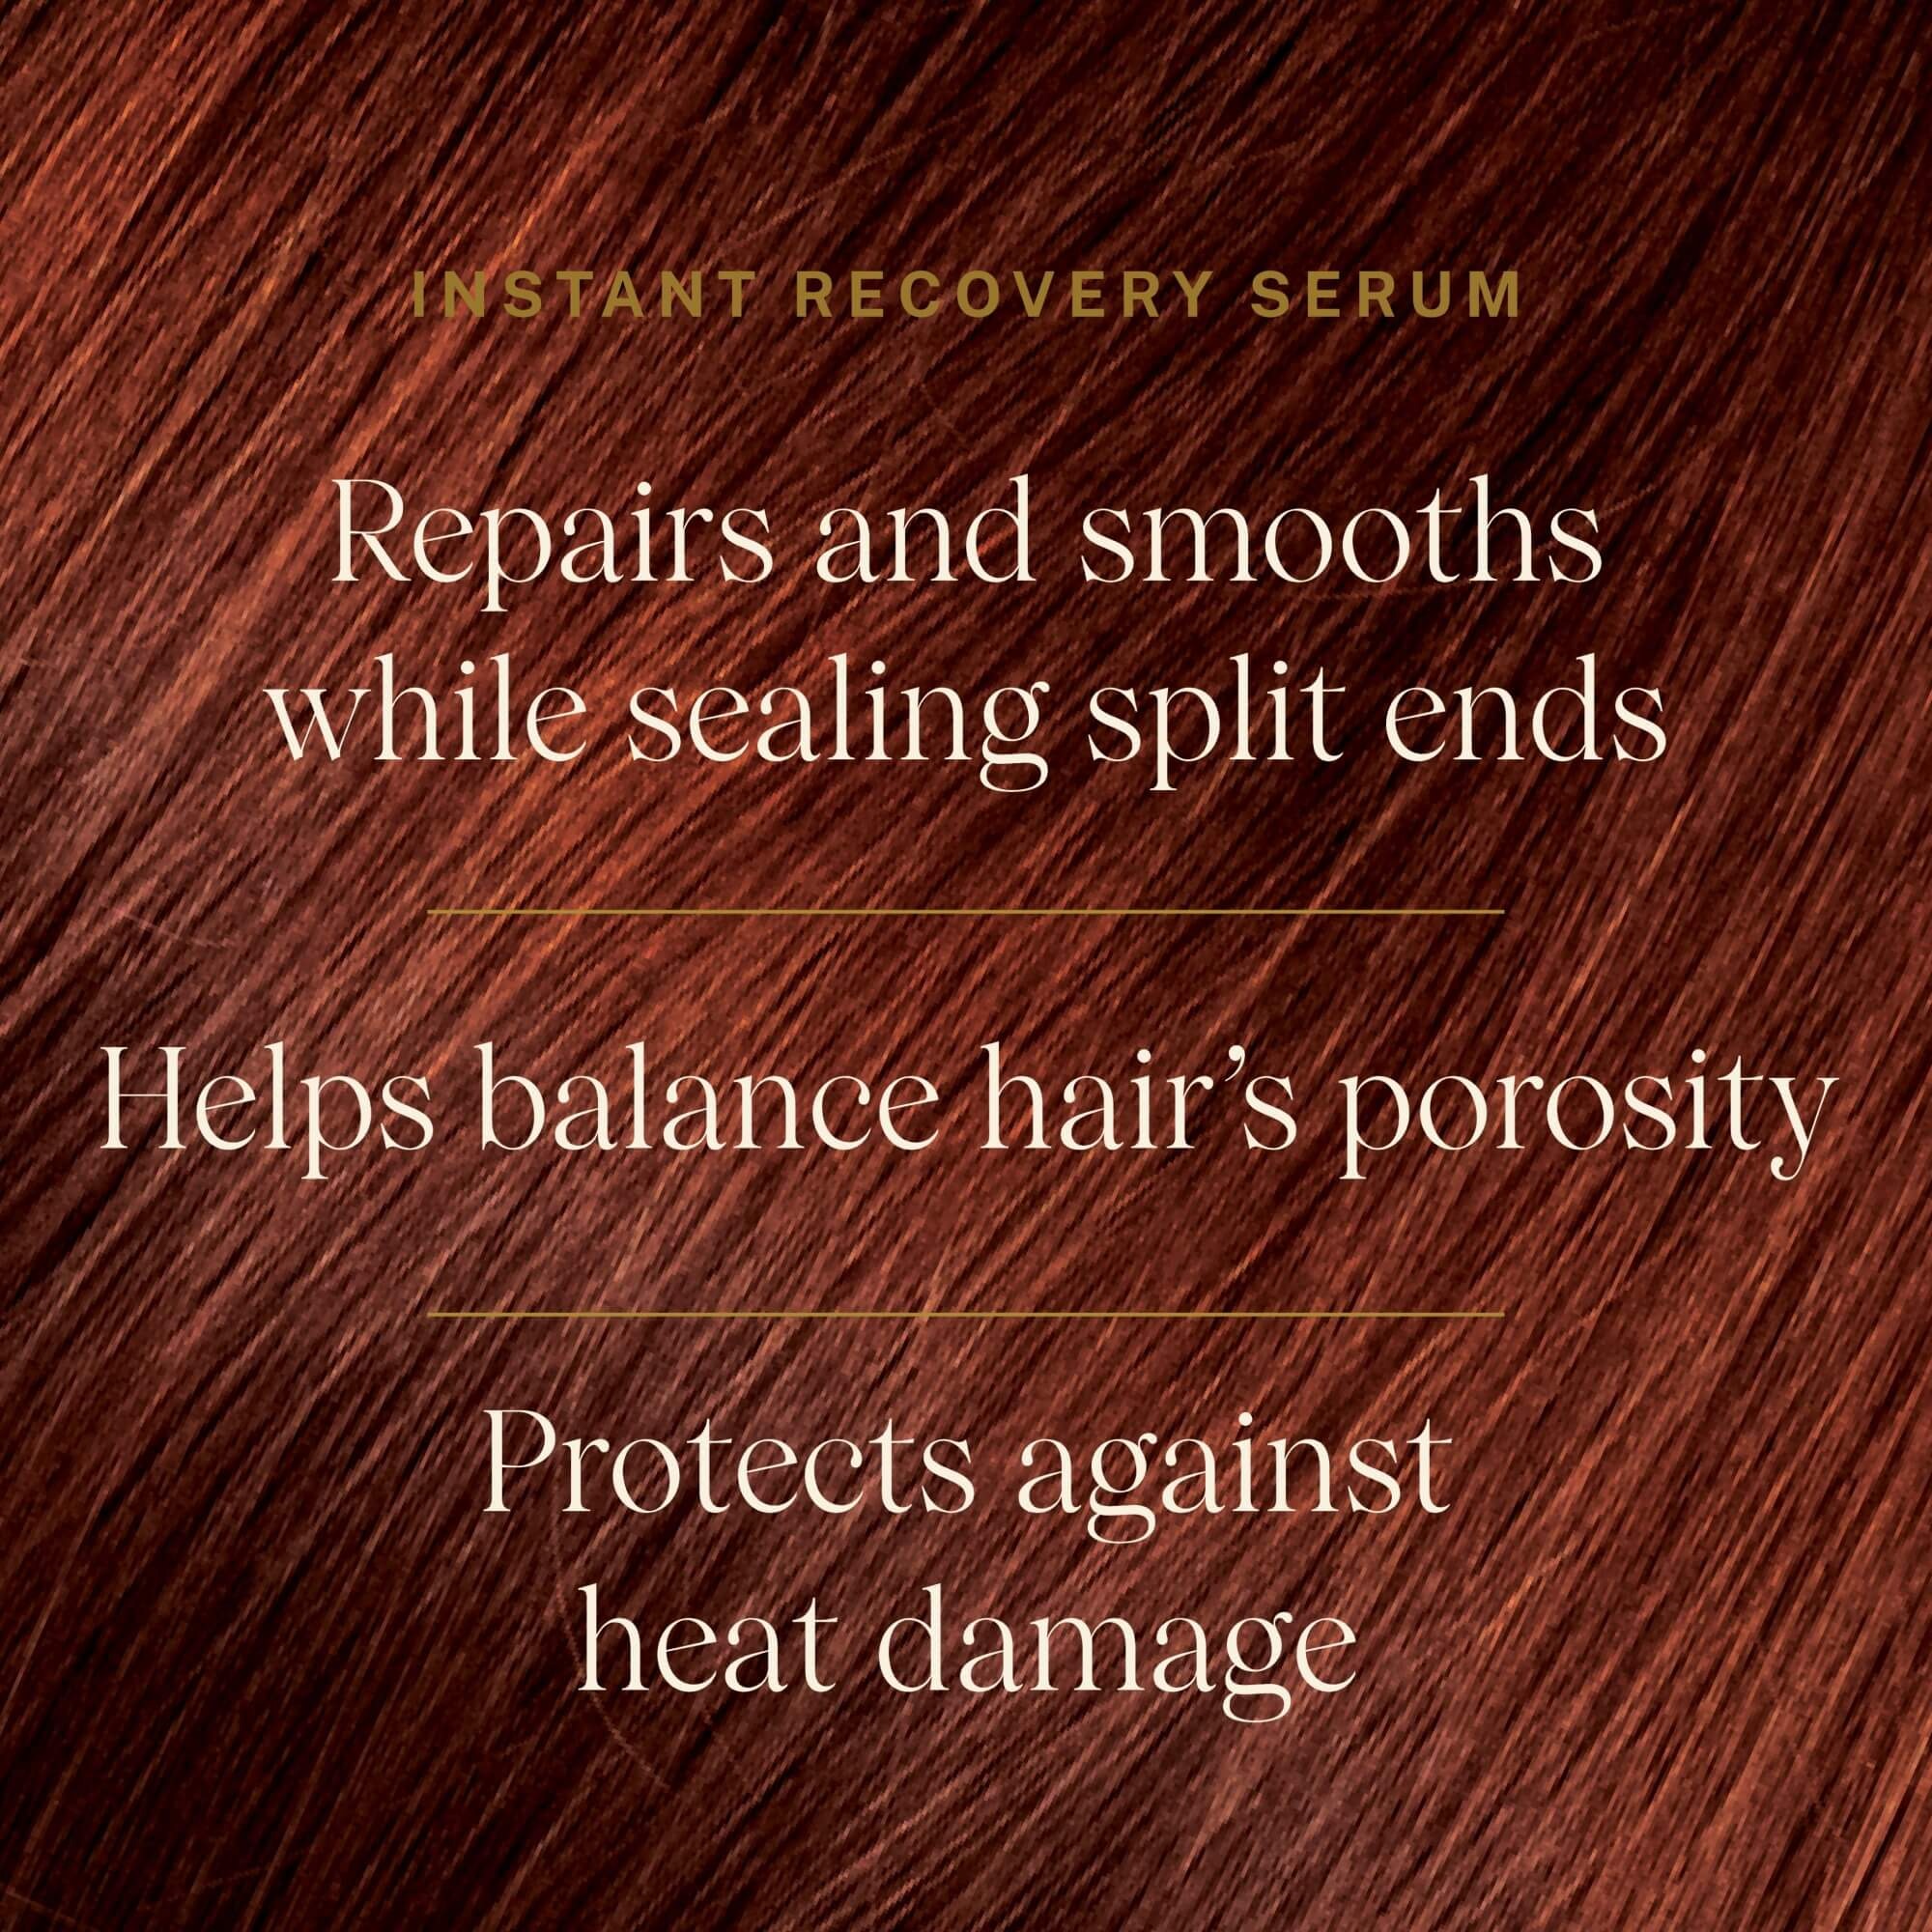 JVN Instant Recovery Serum hair style primer repairs and smooths hair while sealing split ends; helps balance hair's porosity; protects against heat damage